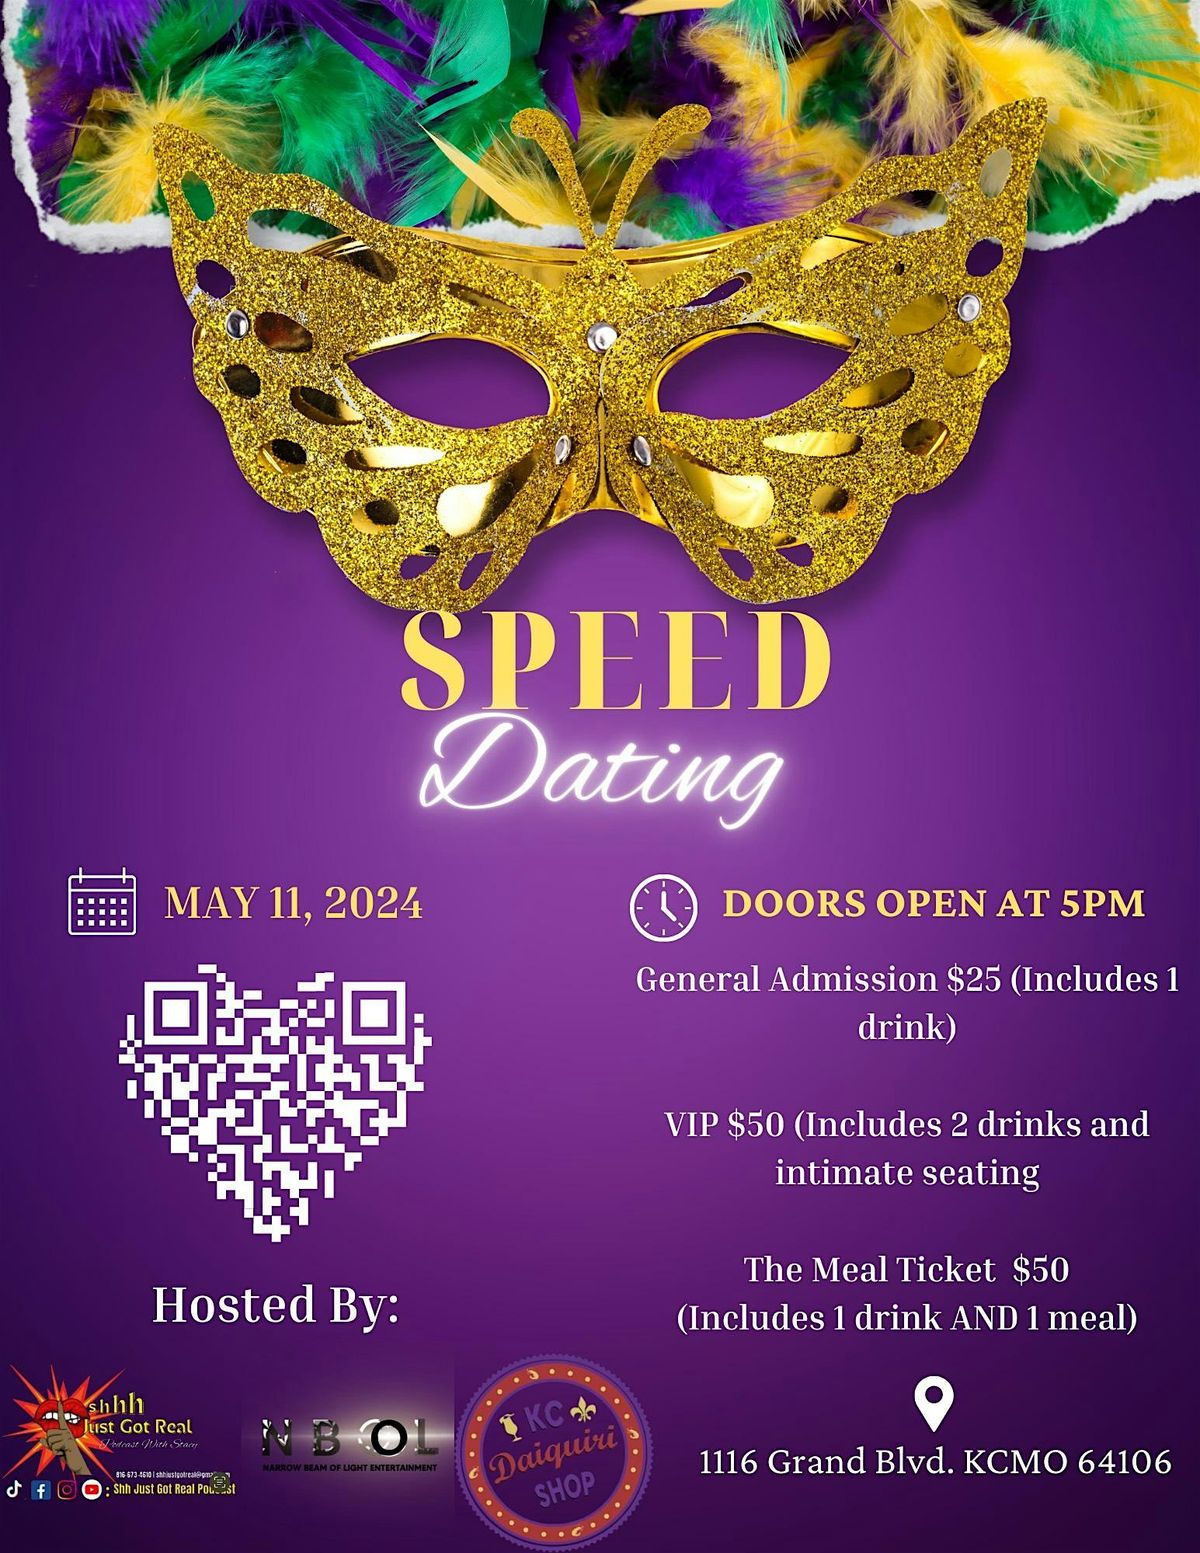 "Find your Match" Speed Dating Event